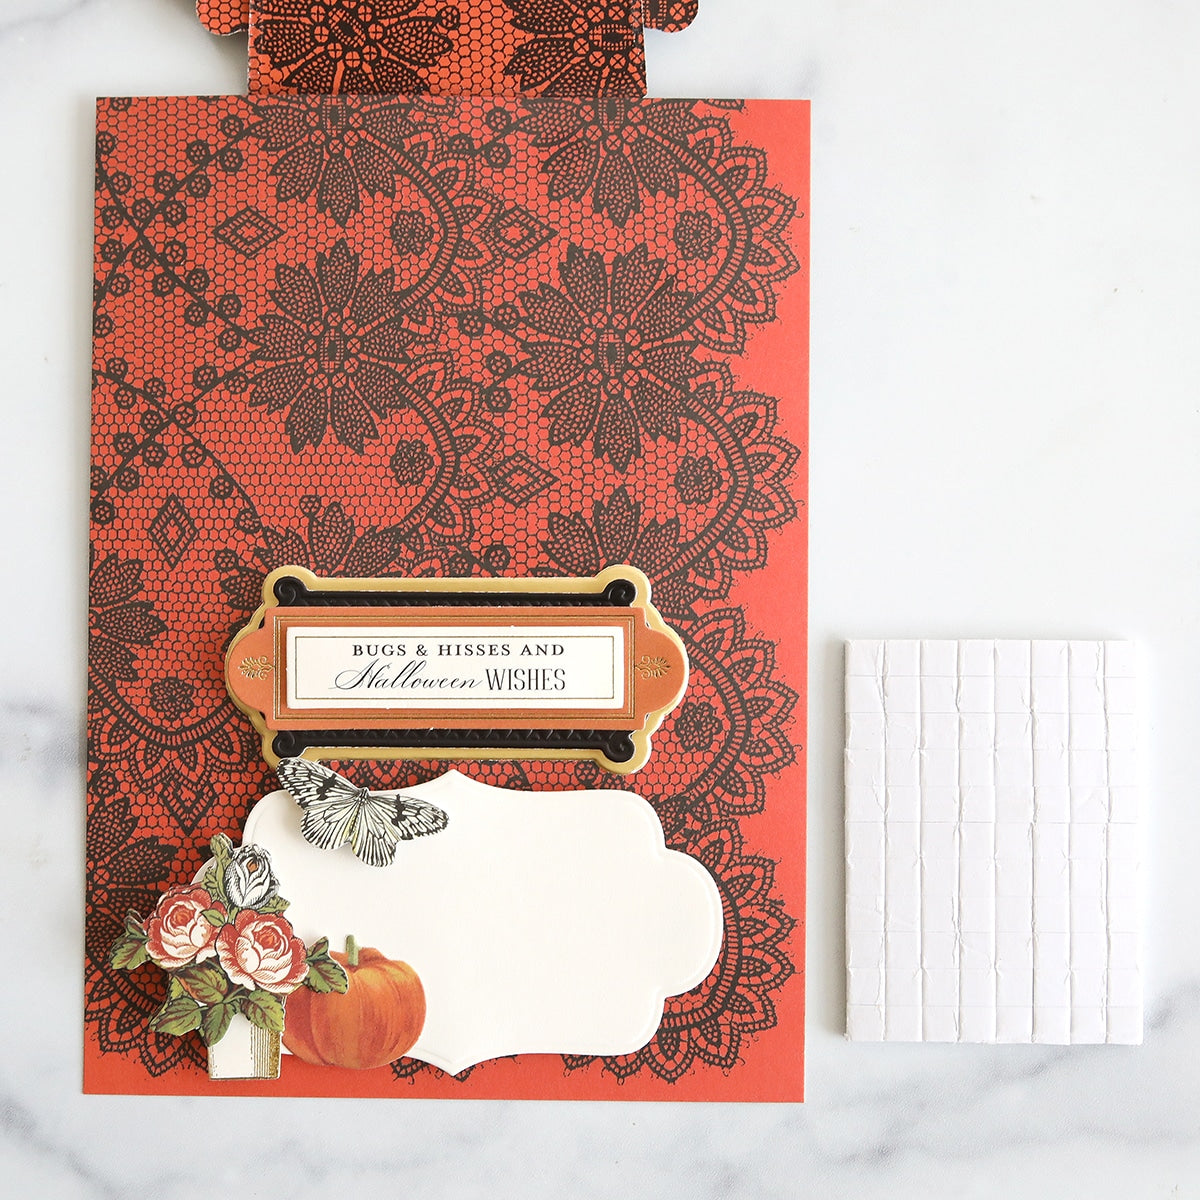 A card with lace and a pumpkin on it.